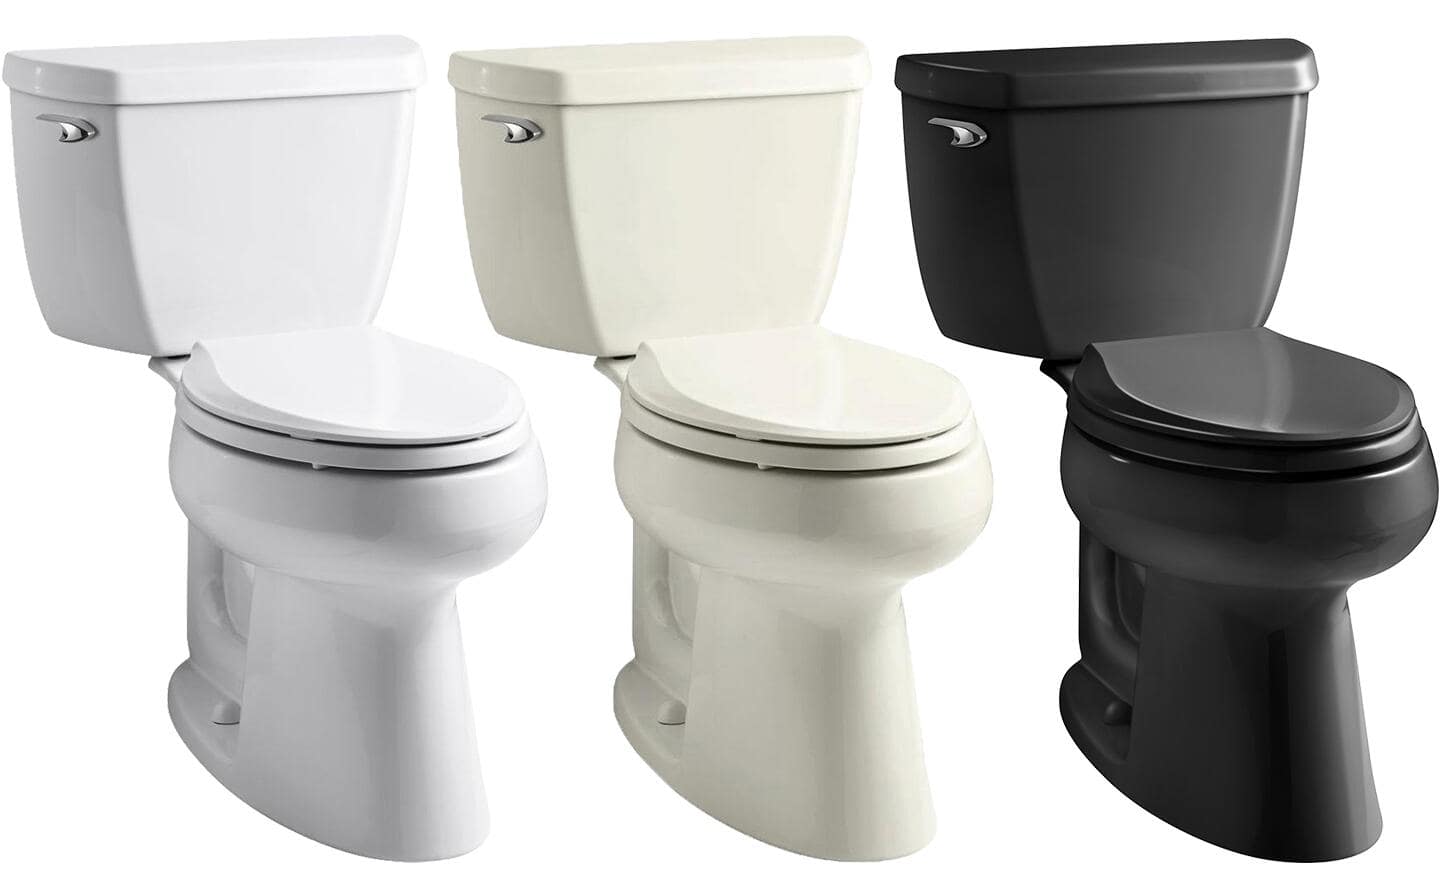 A white toilet, an almond toilet and a black toilet placed side-by-side.